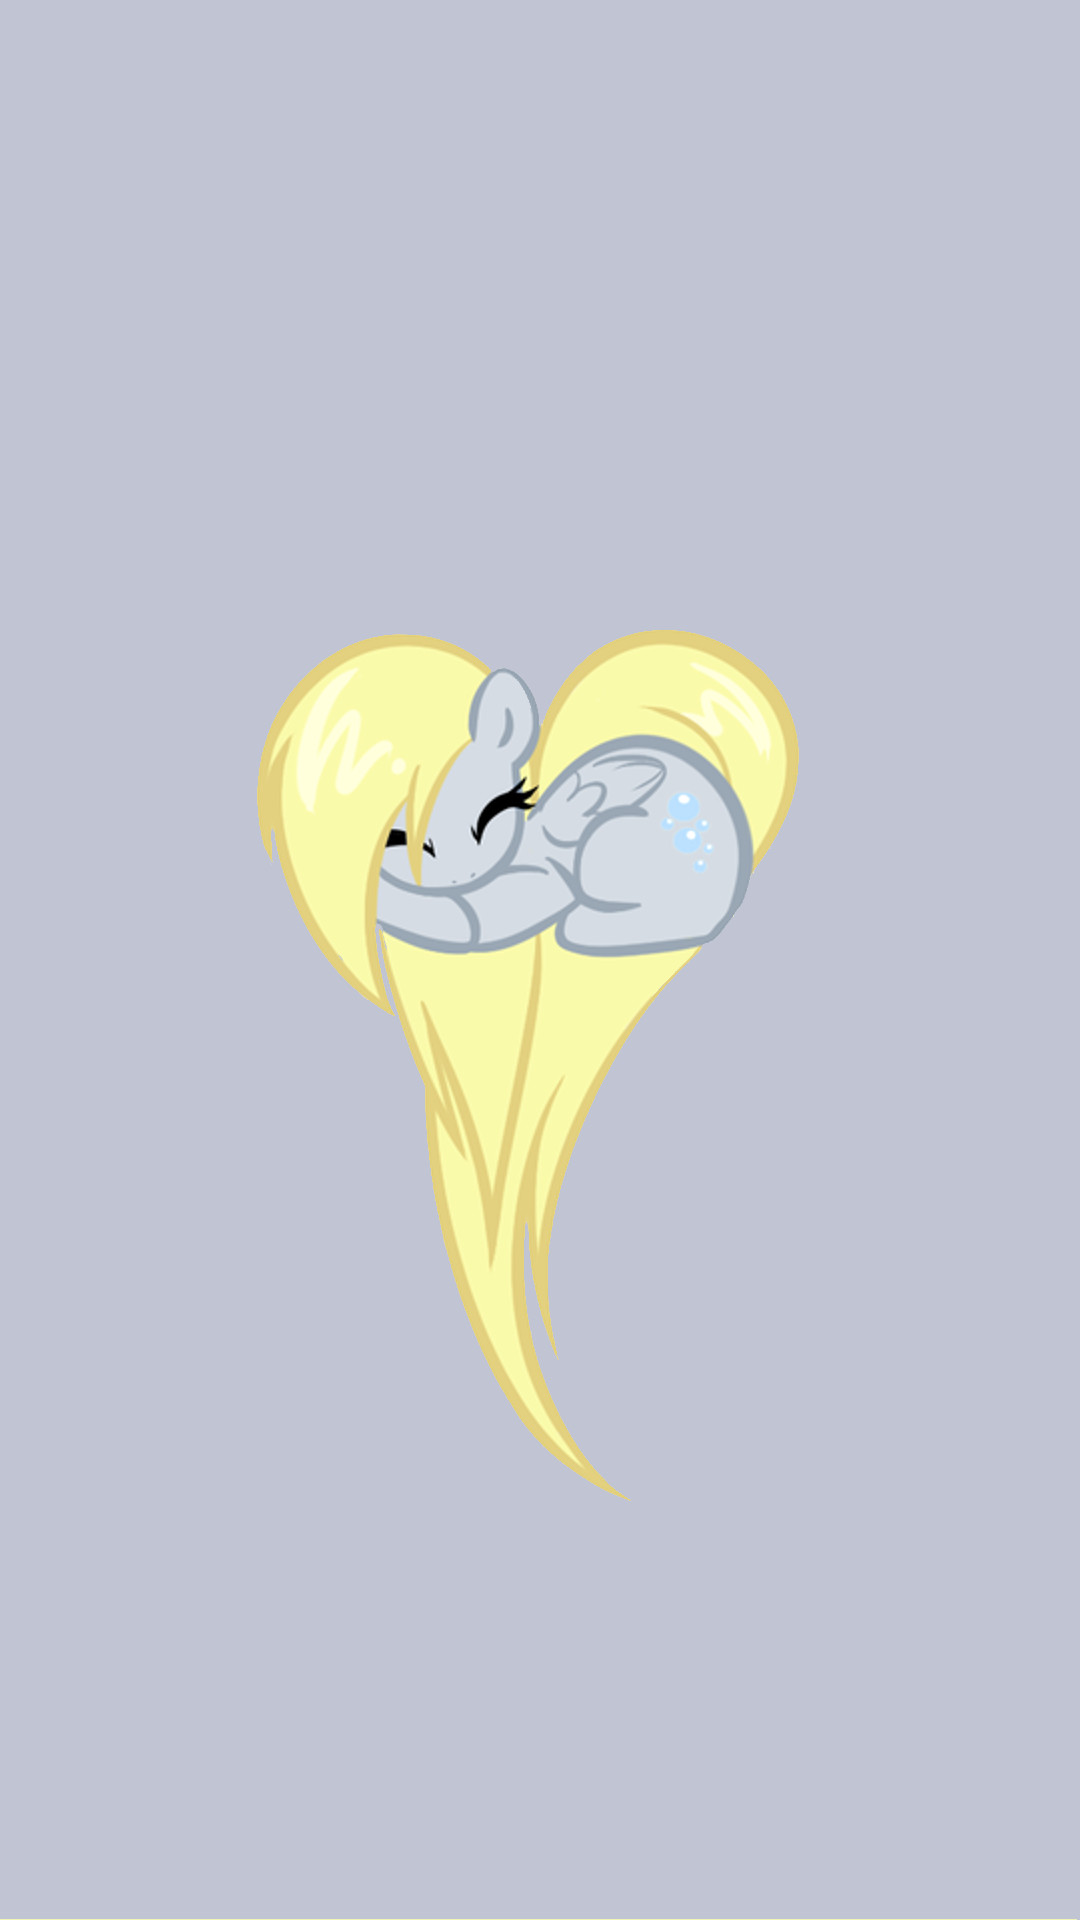 1080x1920 My Little Pony phone wallpapers. by polarbear4321Aug 15 2014. Derpy Heart